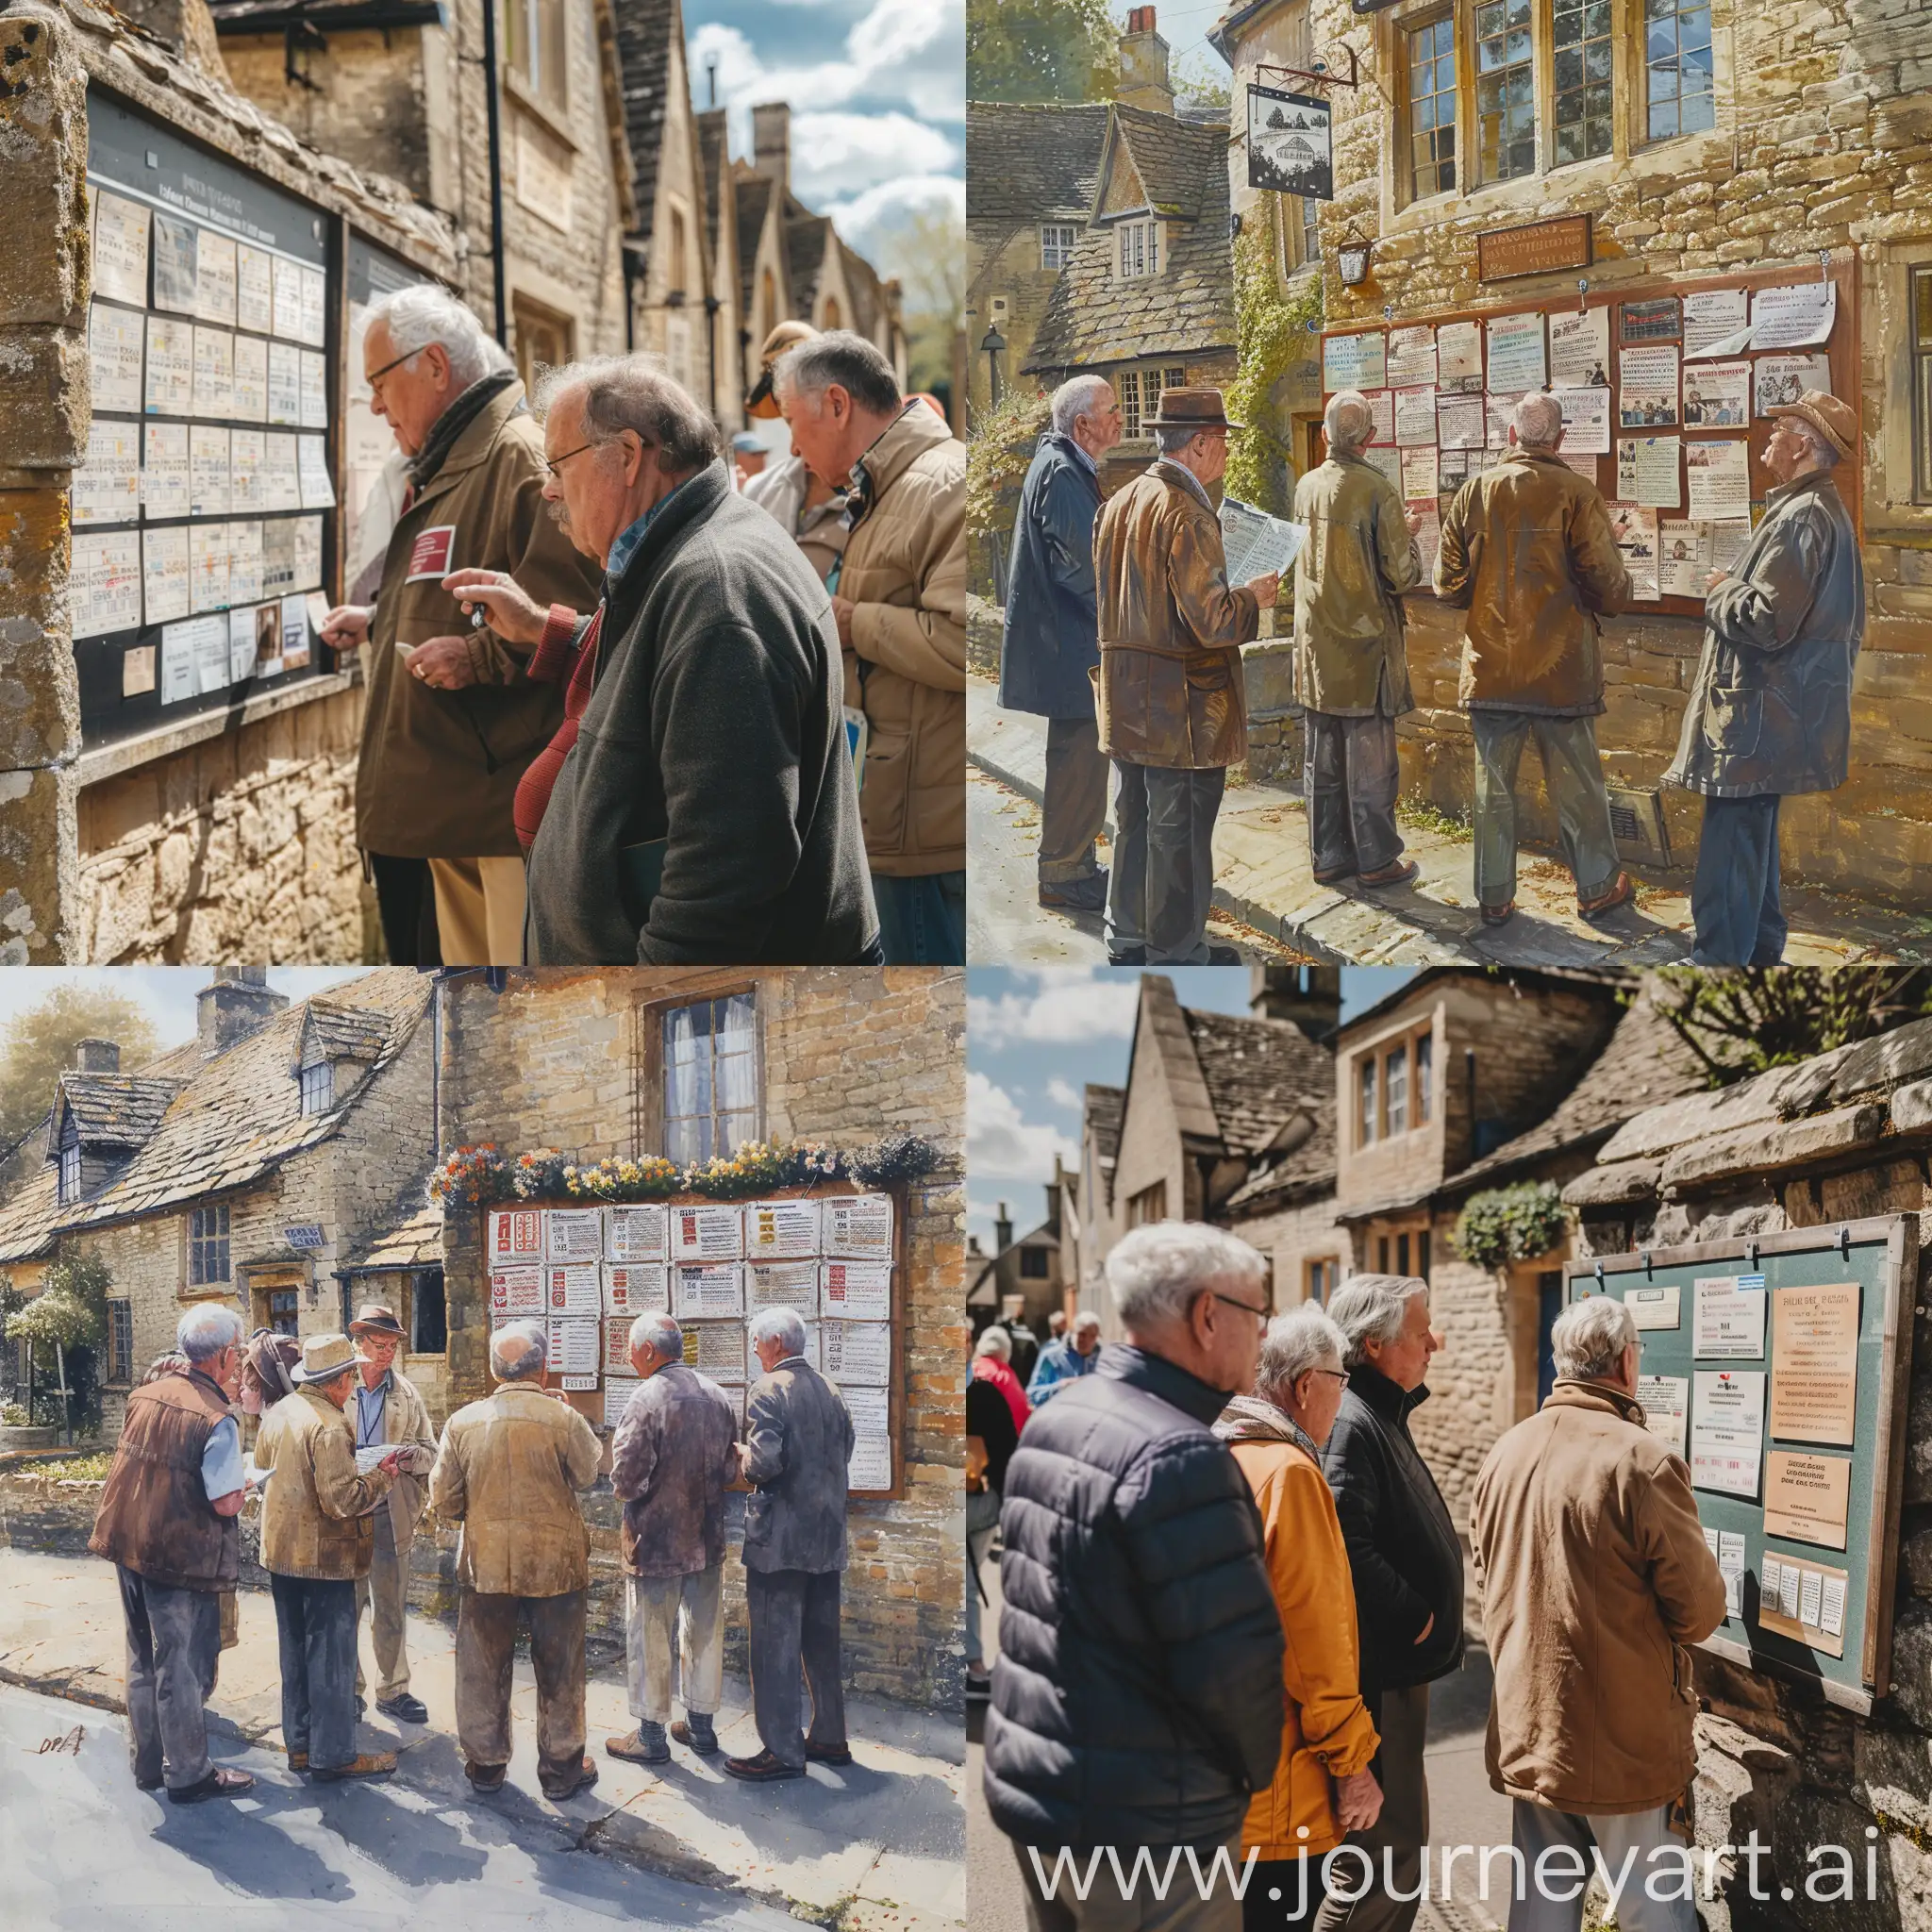 situated in a small cotswold town, with old stone buildinds, a group of older men and women who are looking for inspiration, theyare looking at a large notice board with a lot of subjects and activities to choose from, the sun is shining and everyone looks happy